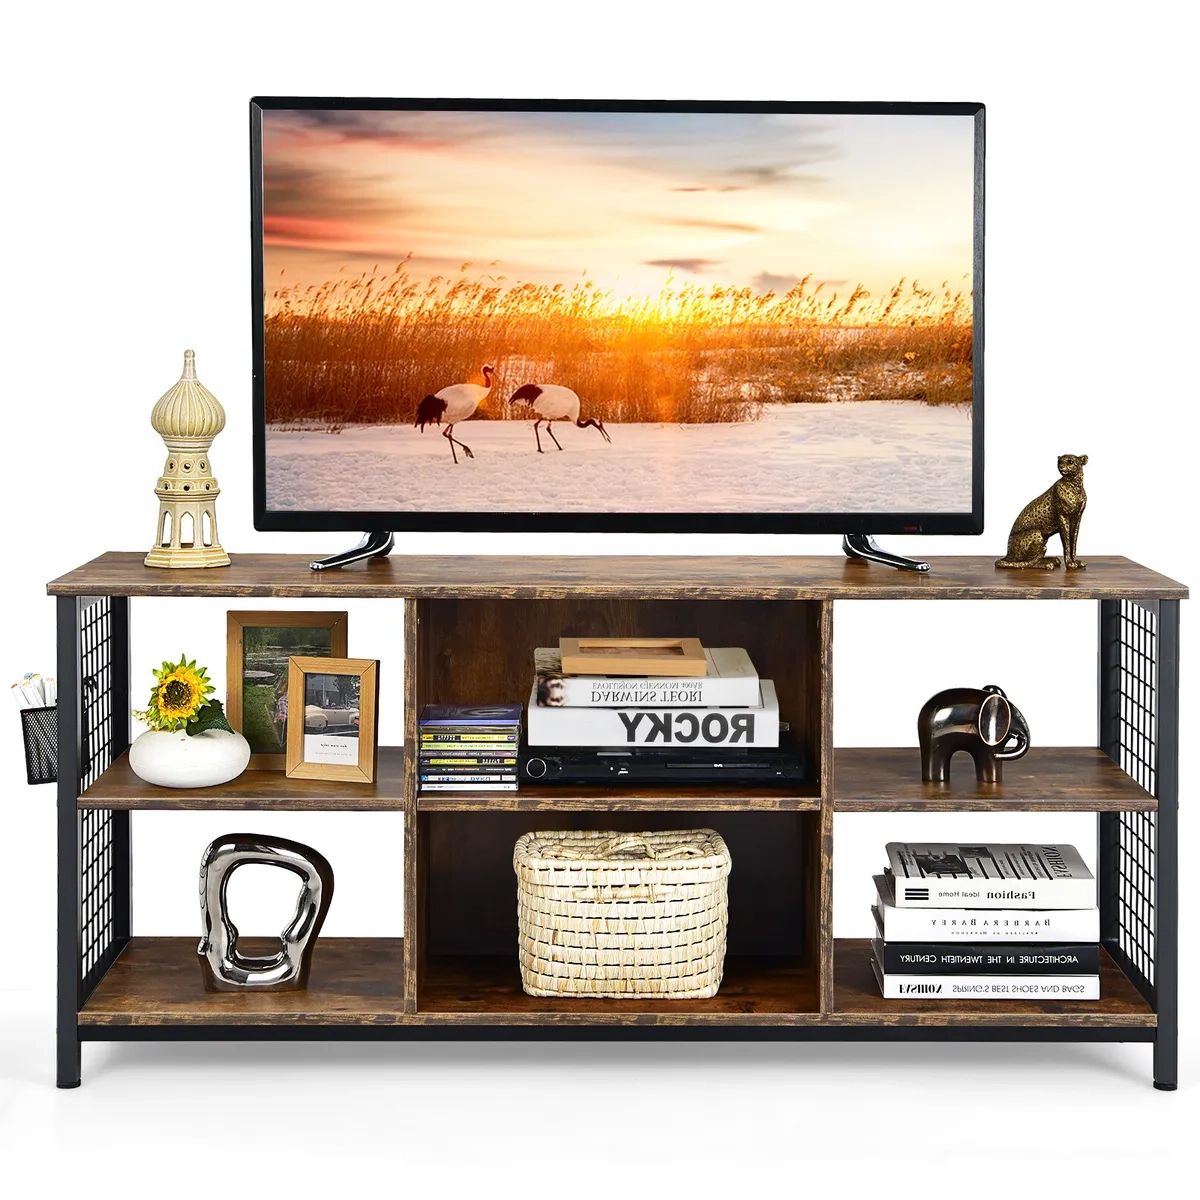 Entertainment Media Center 3 Tier Tv Stand For Tv's Up To 65" W/storage  Basket | Ebay Intended For Tier Stands For Tvs (View 3 of 20)